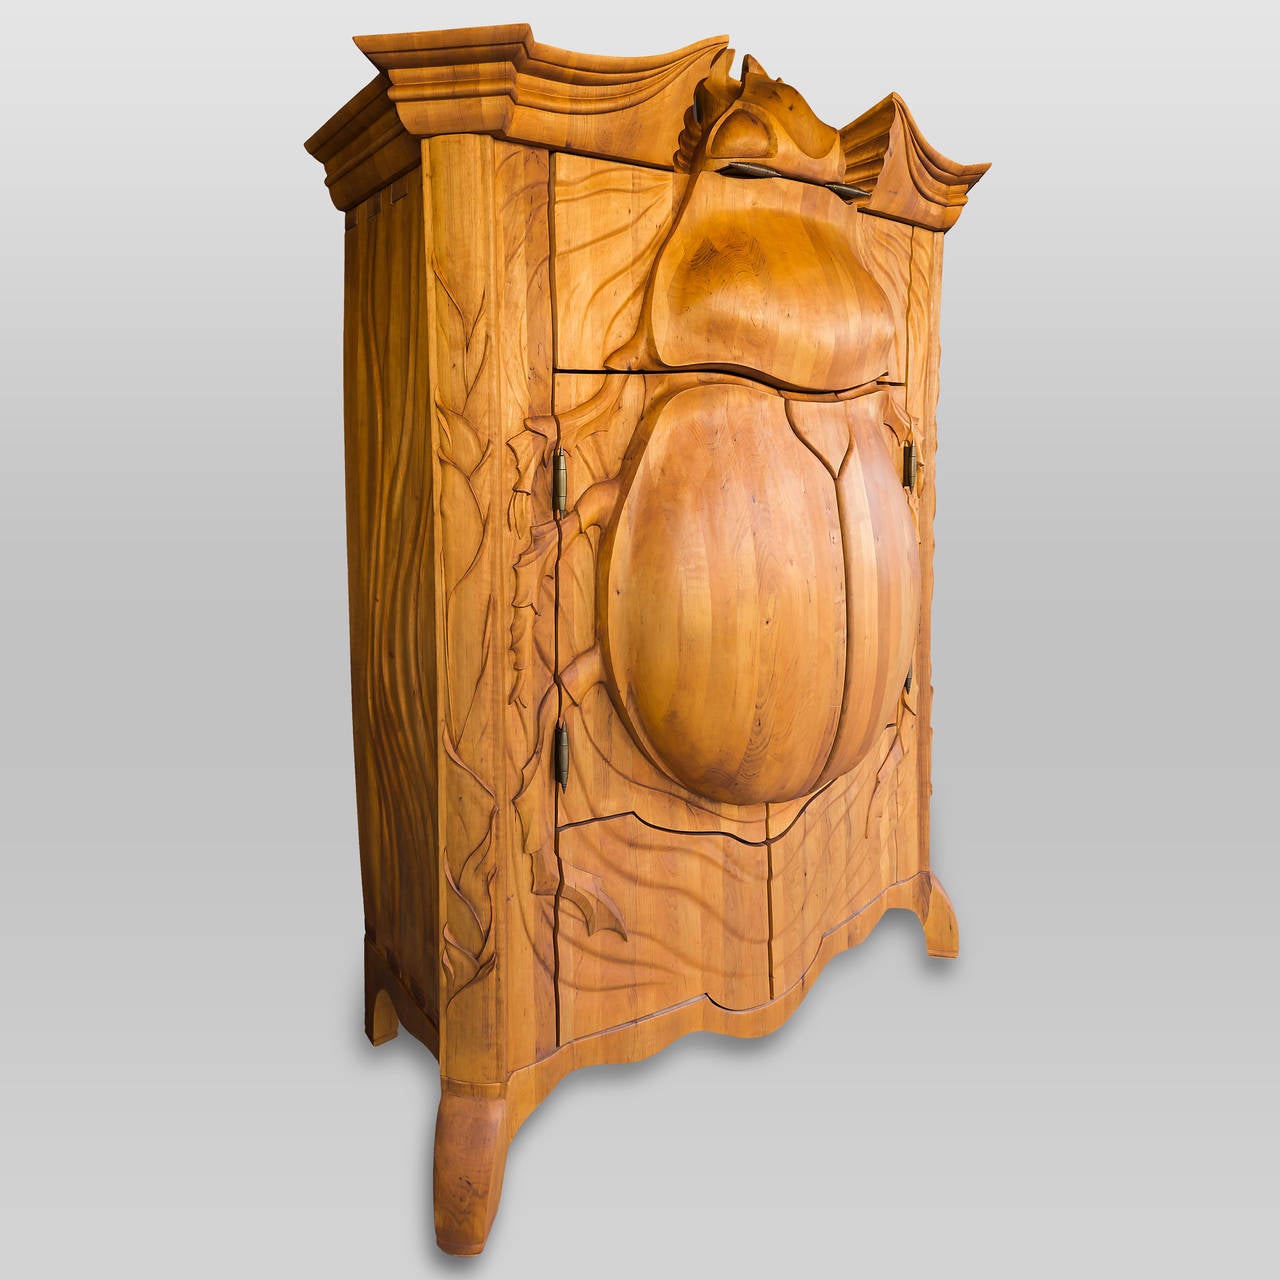 Modern Unique and Extraordinary “Beetle” Cabinet Made by Janis Straupe, Latvia, 2014